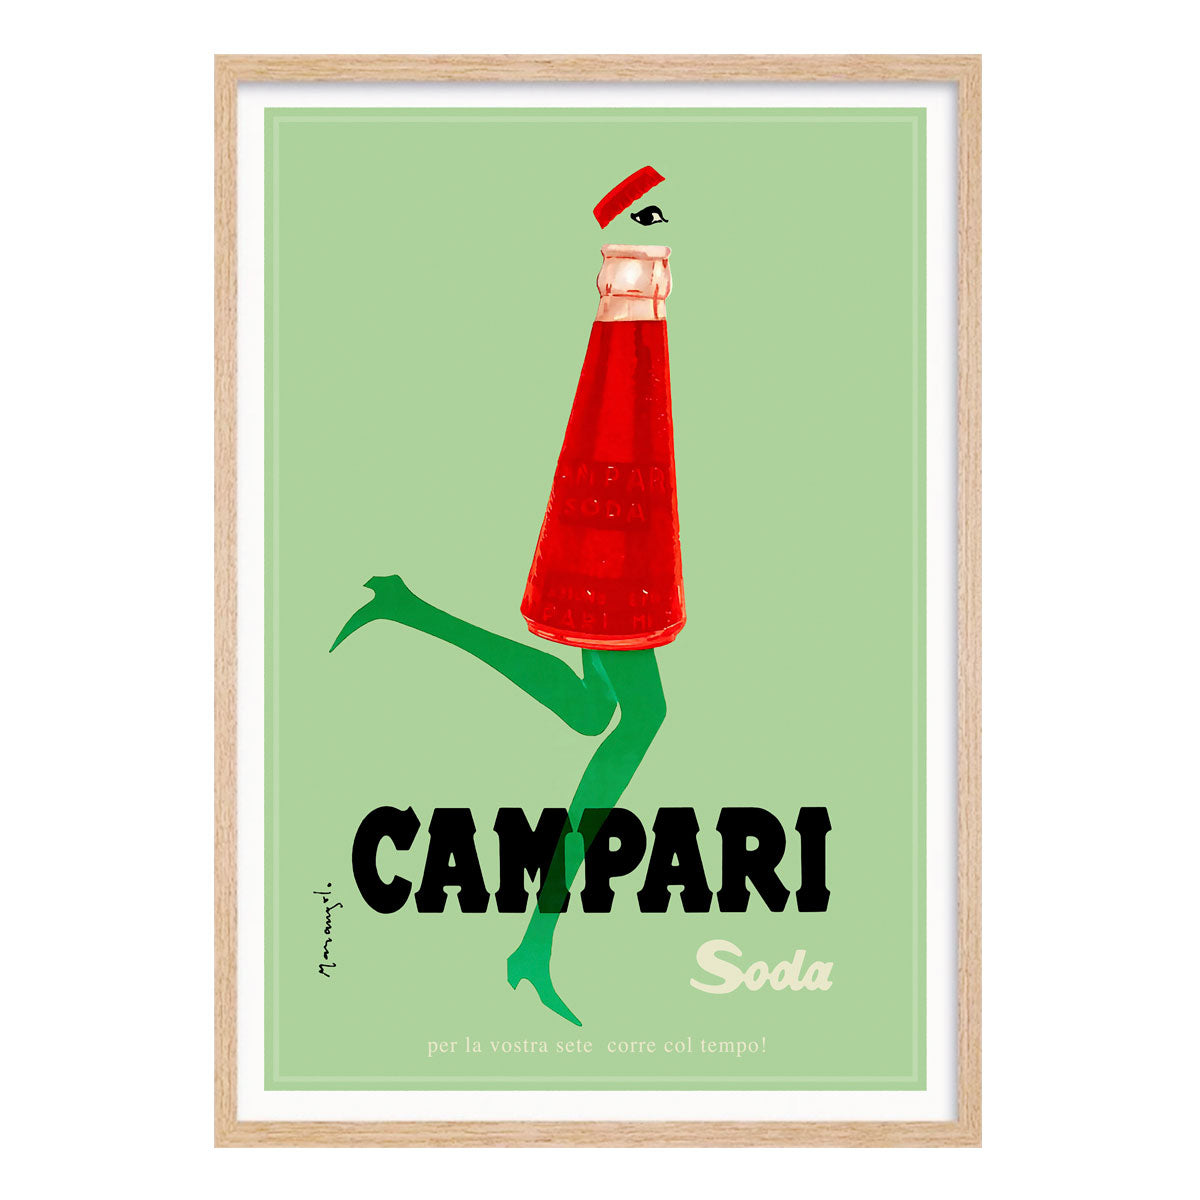 Campari Soda skipping retro vintage poster print in oak frame from Places We Luv